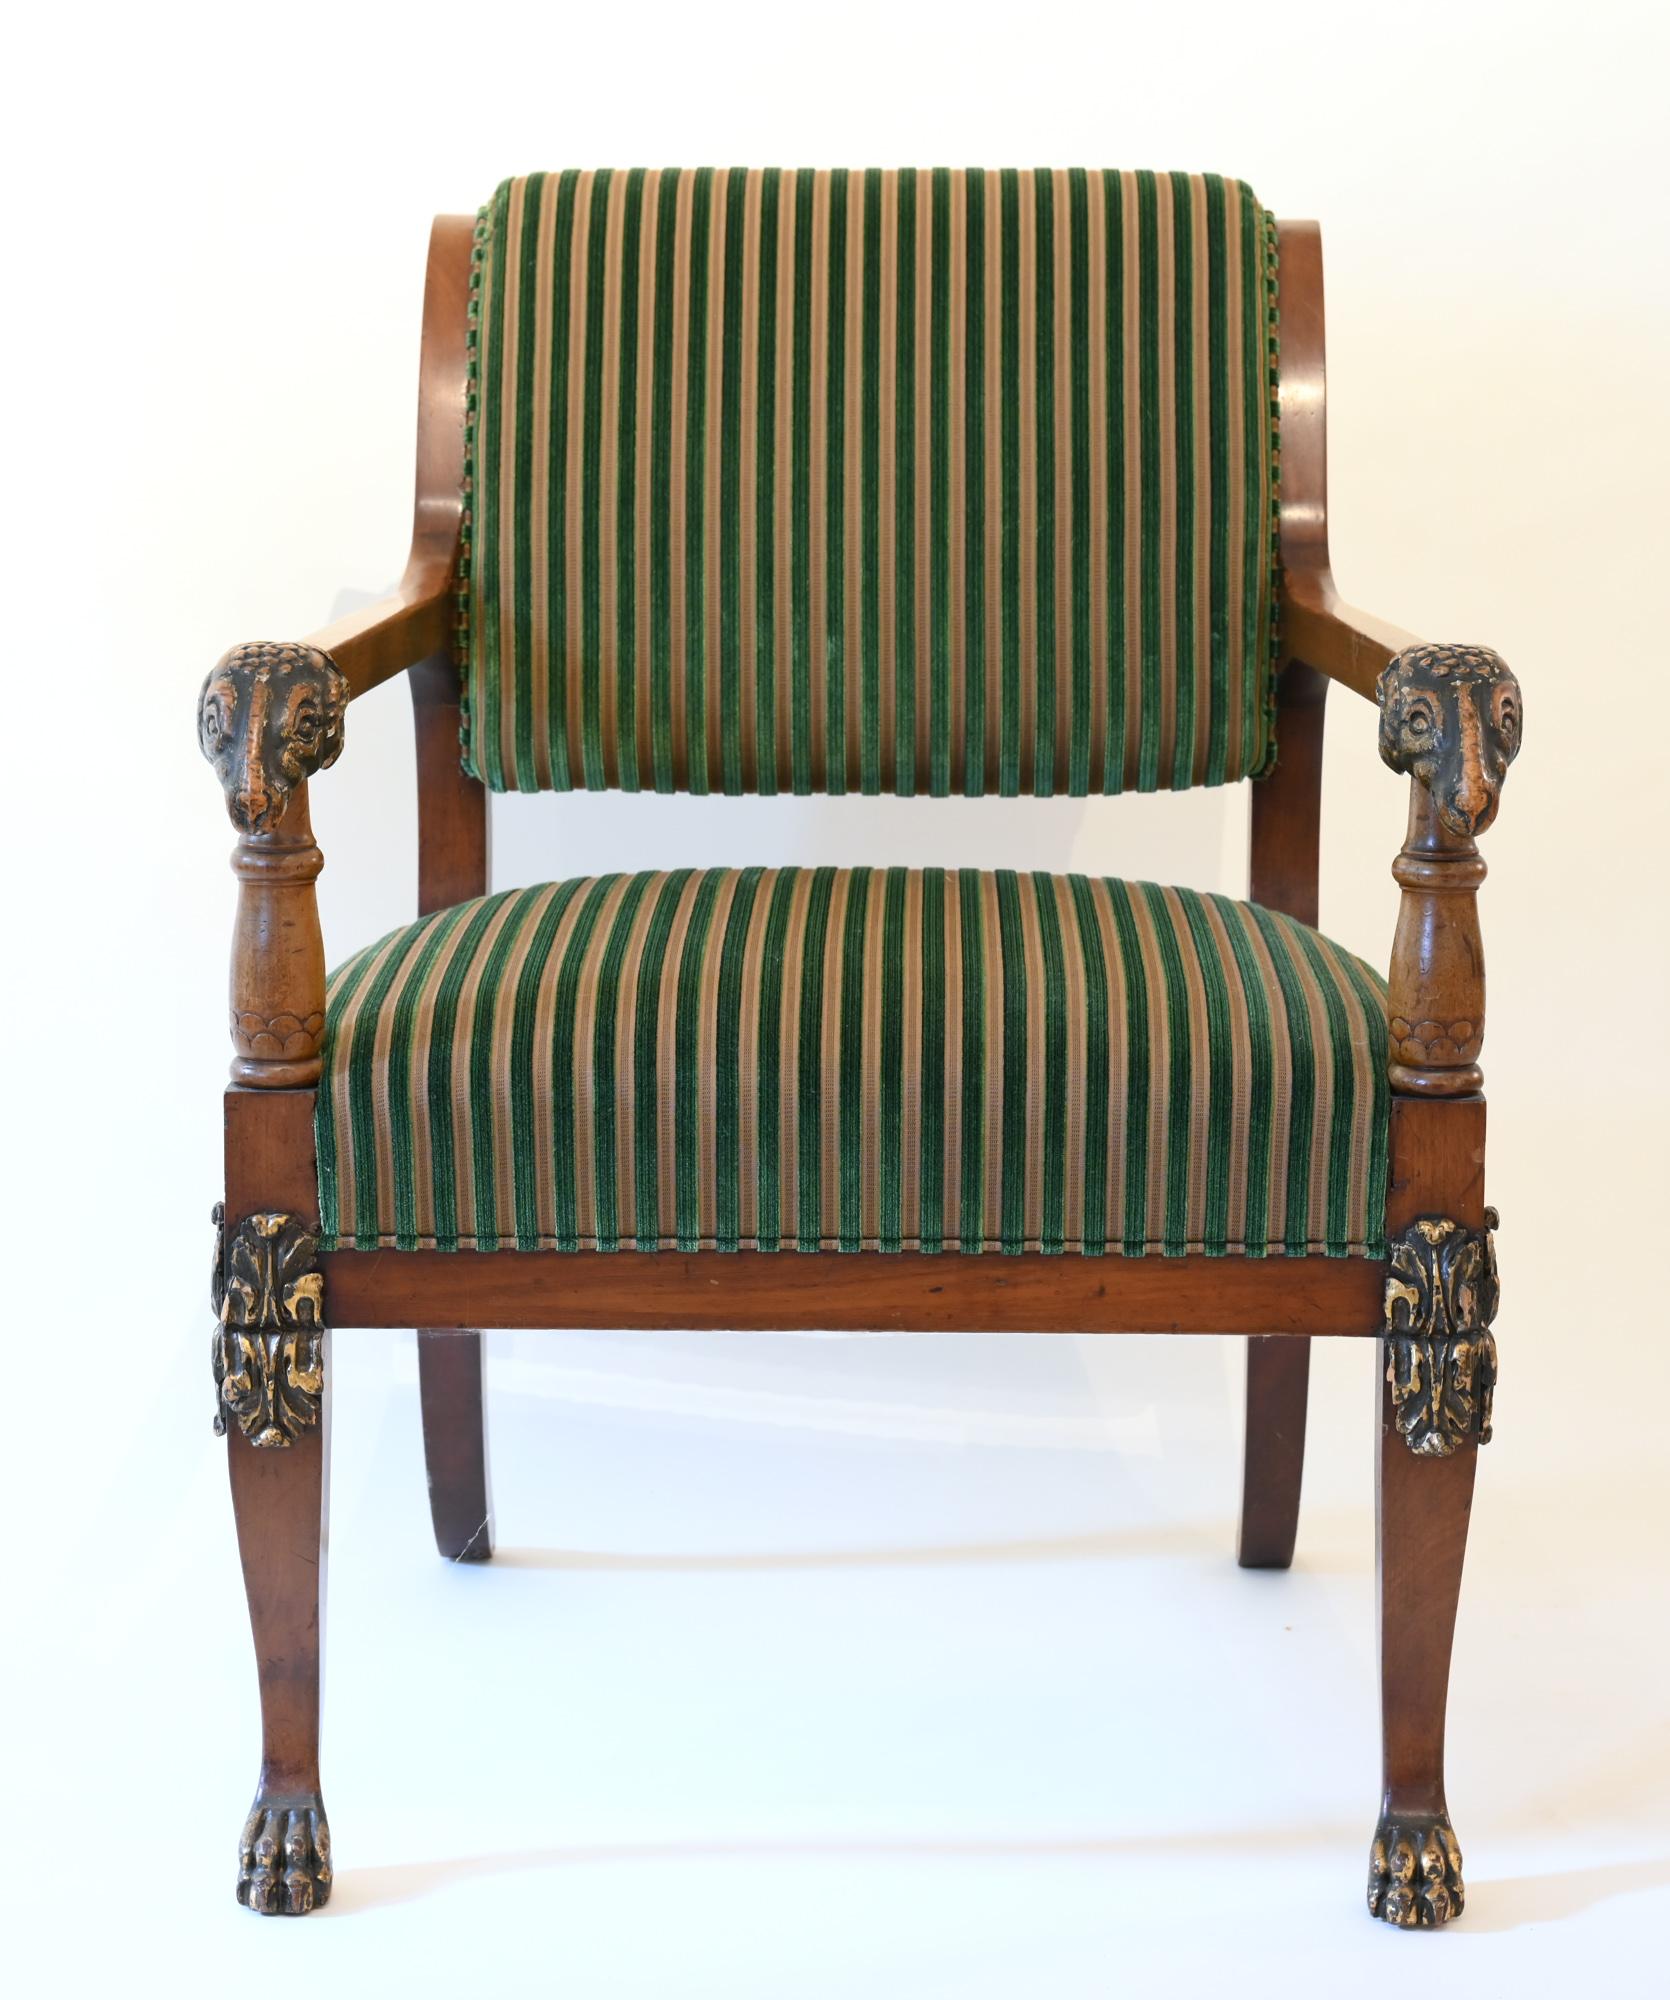 Pair of mahogany armchairs with ram heads, end of 18th century, Baltic

Pair of very charming armchairs with ram heads and paws legs, Baltic 1795
The chairs have a wonderful charming patina, the new upholstery is professional done, with fabrics